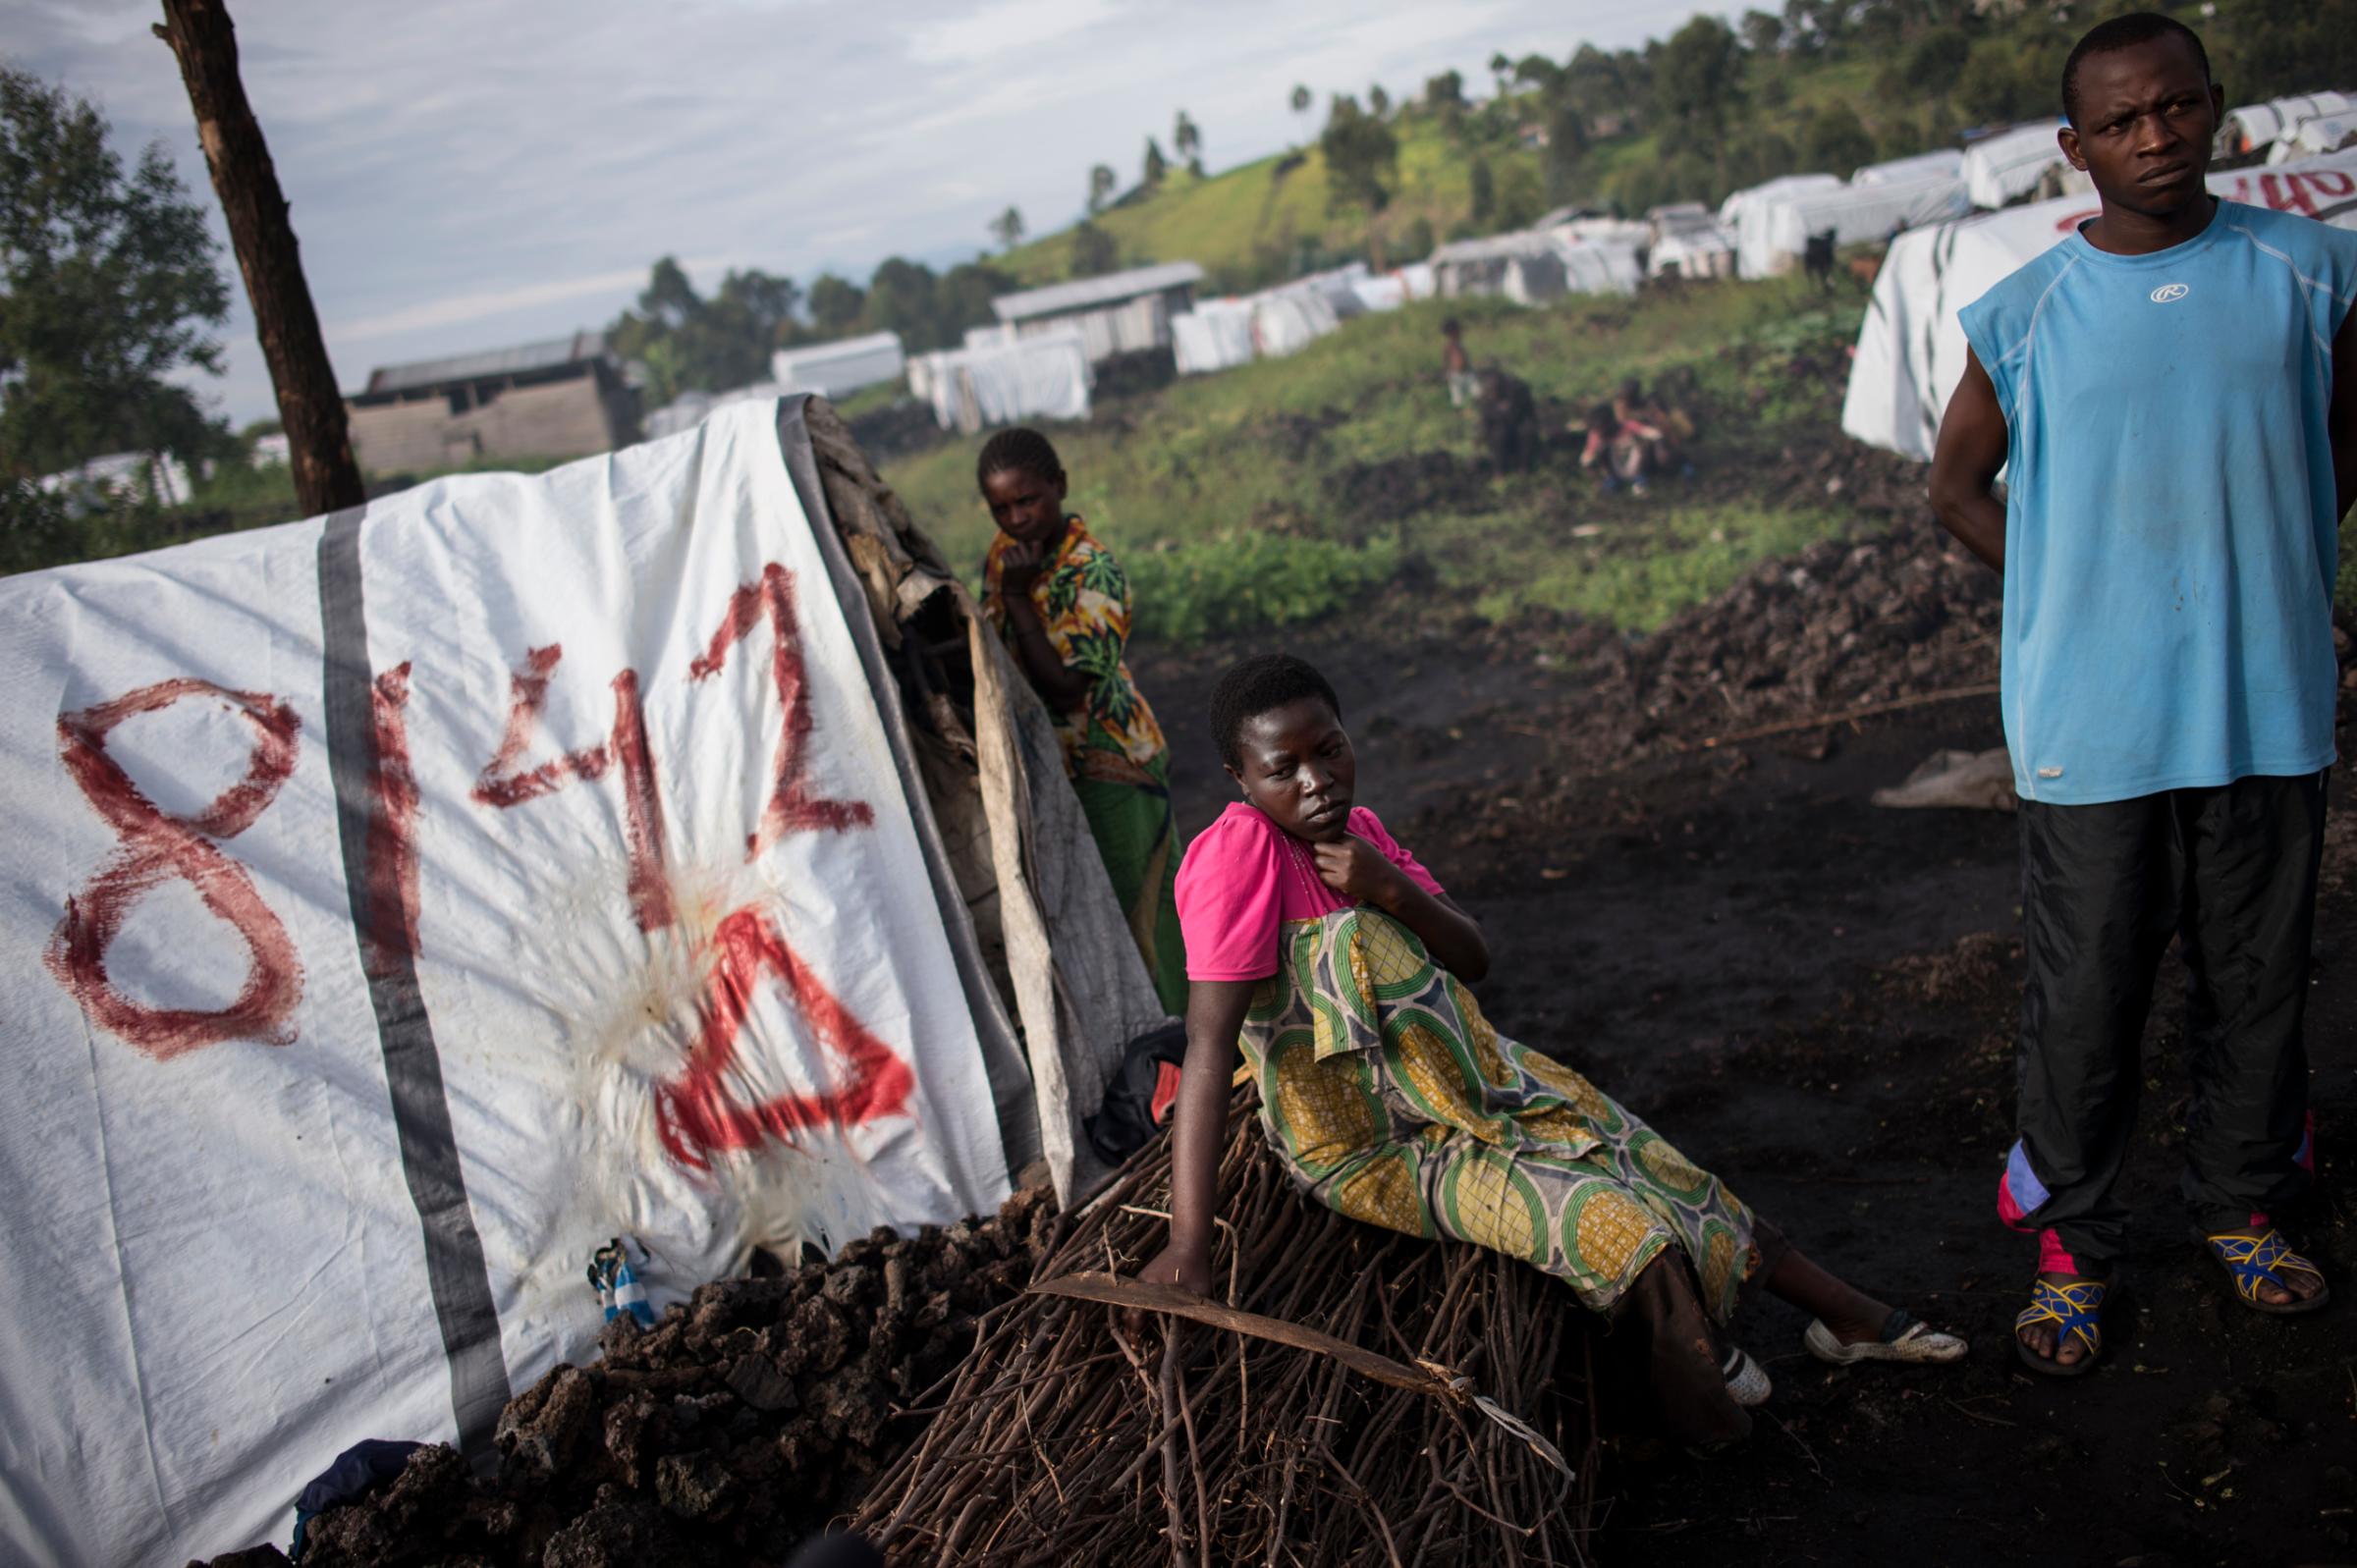 Maiombi Thomas,16 , sits alongside her brother, Innocent kongomani, 22, in the Mugunga 1 camp for internally displaced people, outside Goma, the Democratic Republic of Congo, December 5, 2015. Maiombi became pregnant after she was raped by a ranger when she went to get firewood outside the camp.